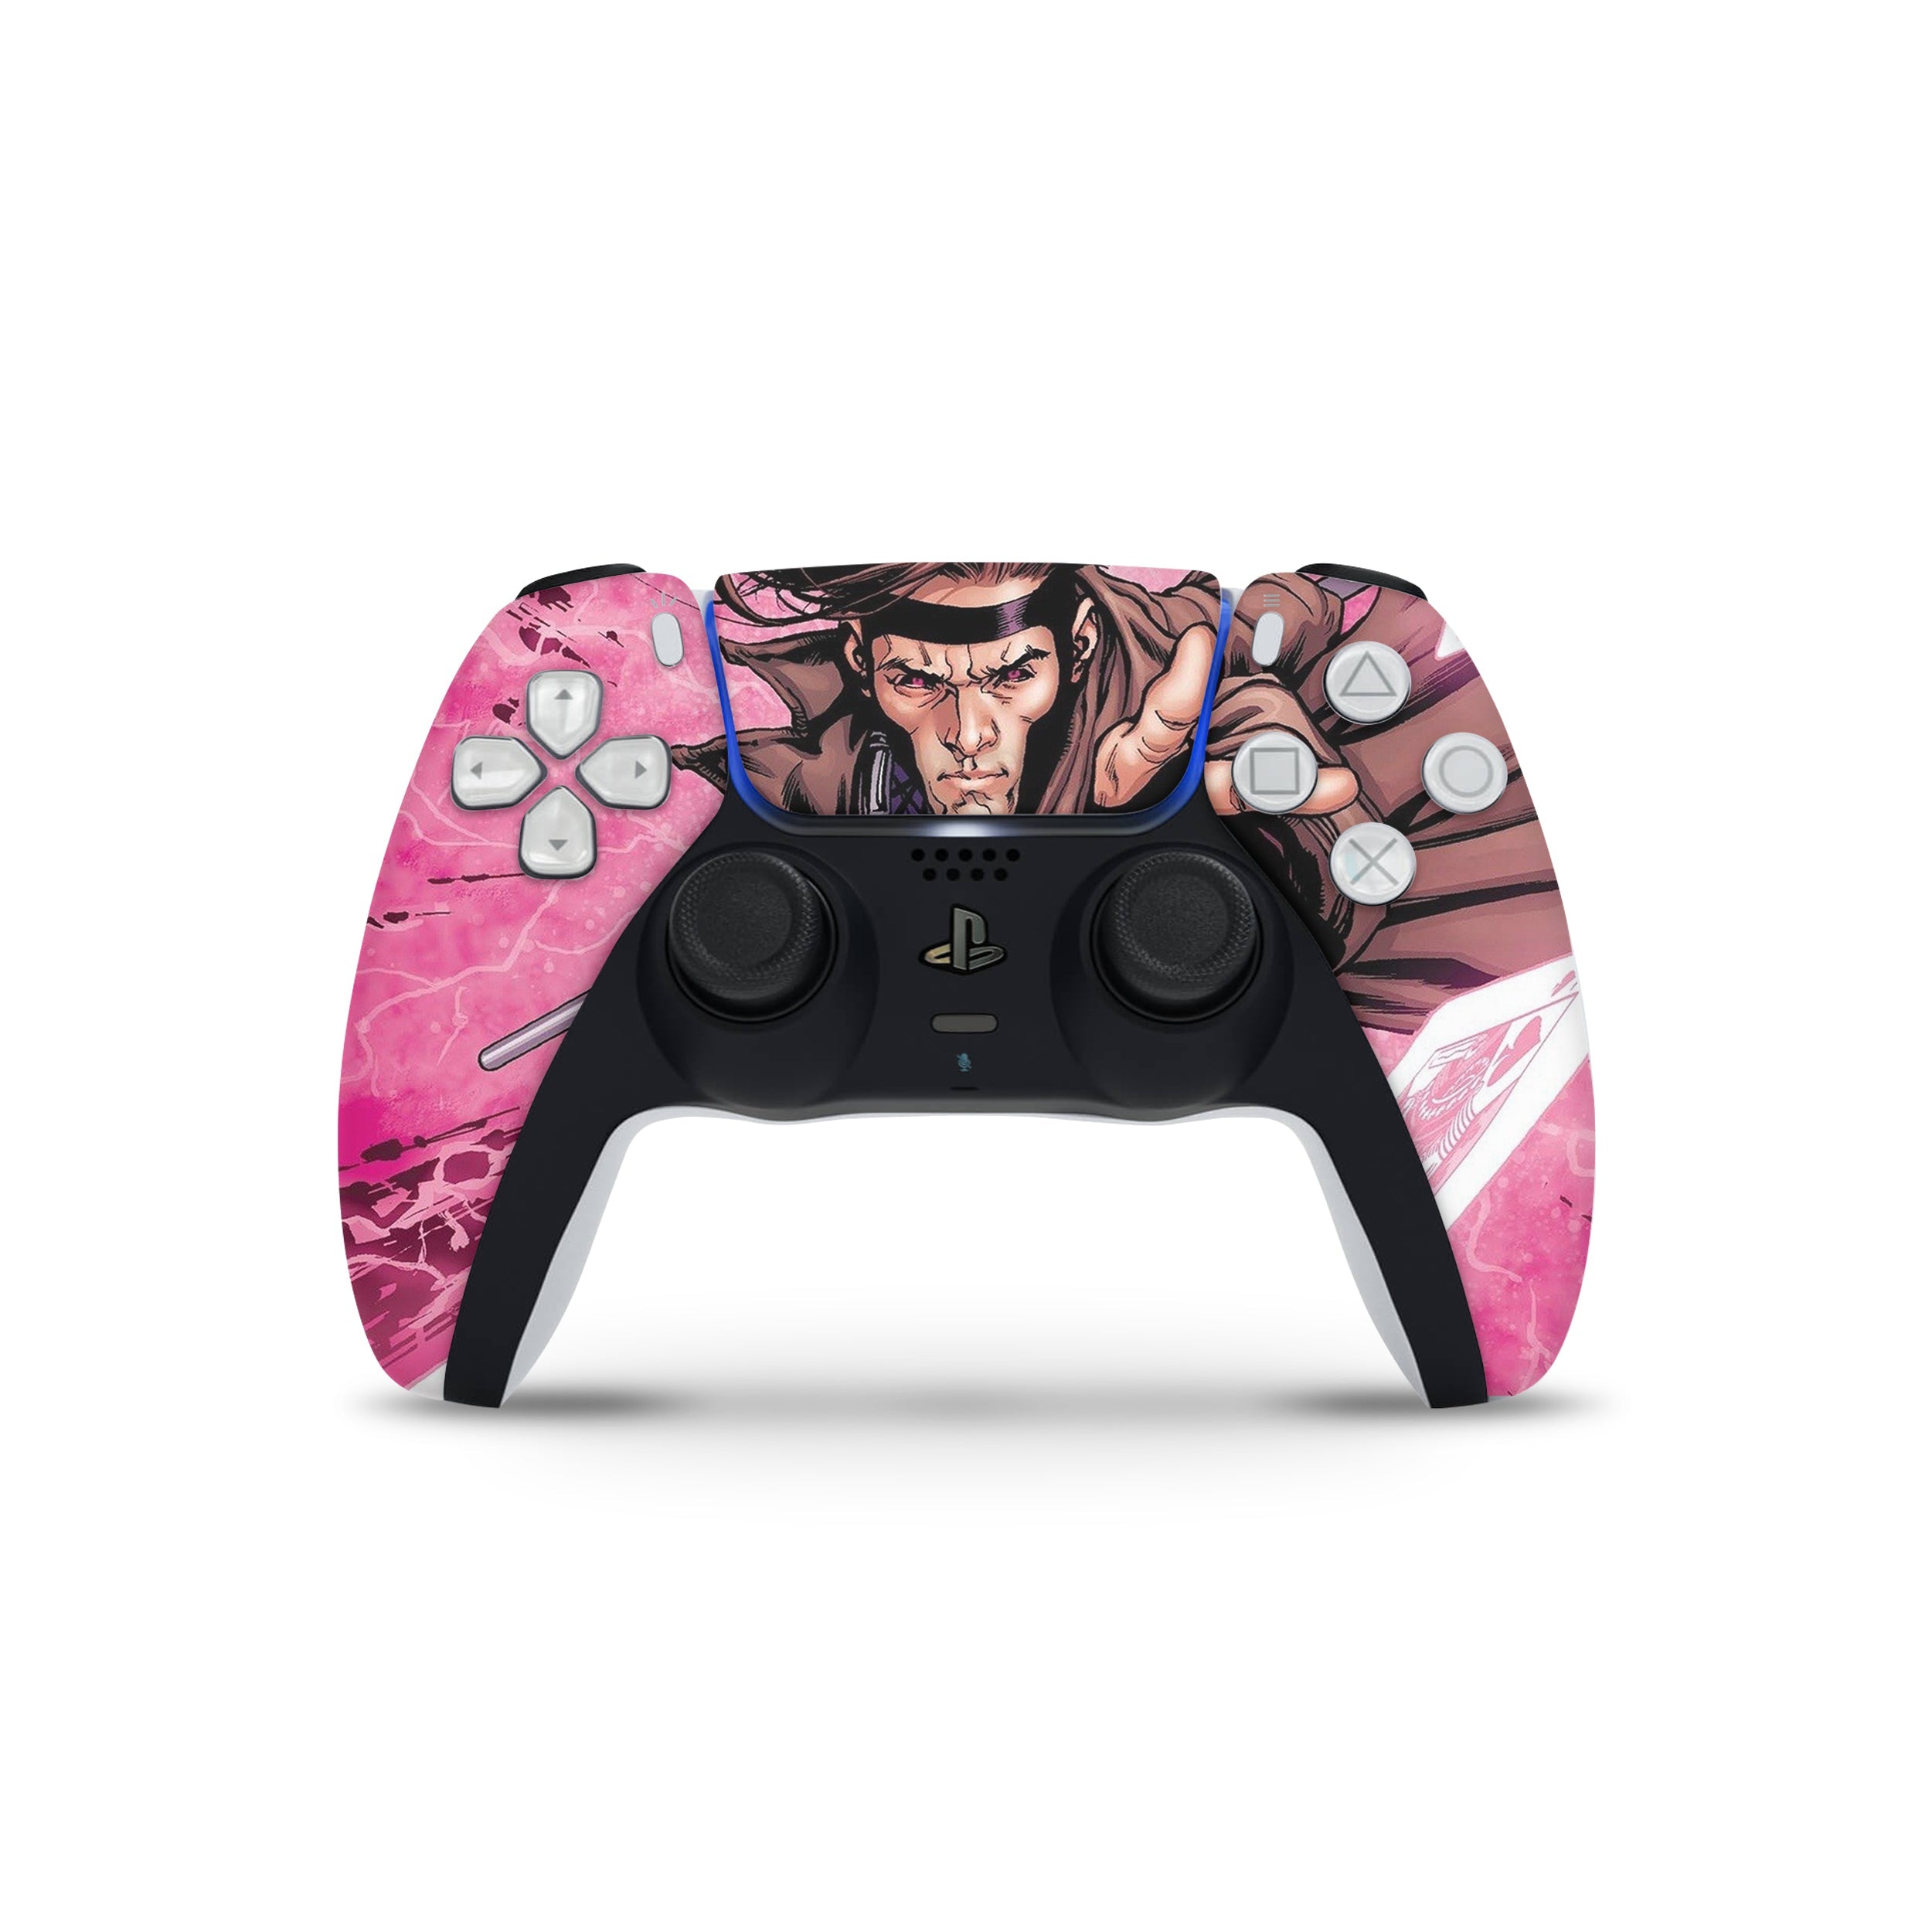 A video game skin featuring a Marvel Comics X Men Gambit design for the PS5 DualSense Controller.